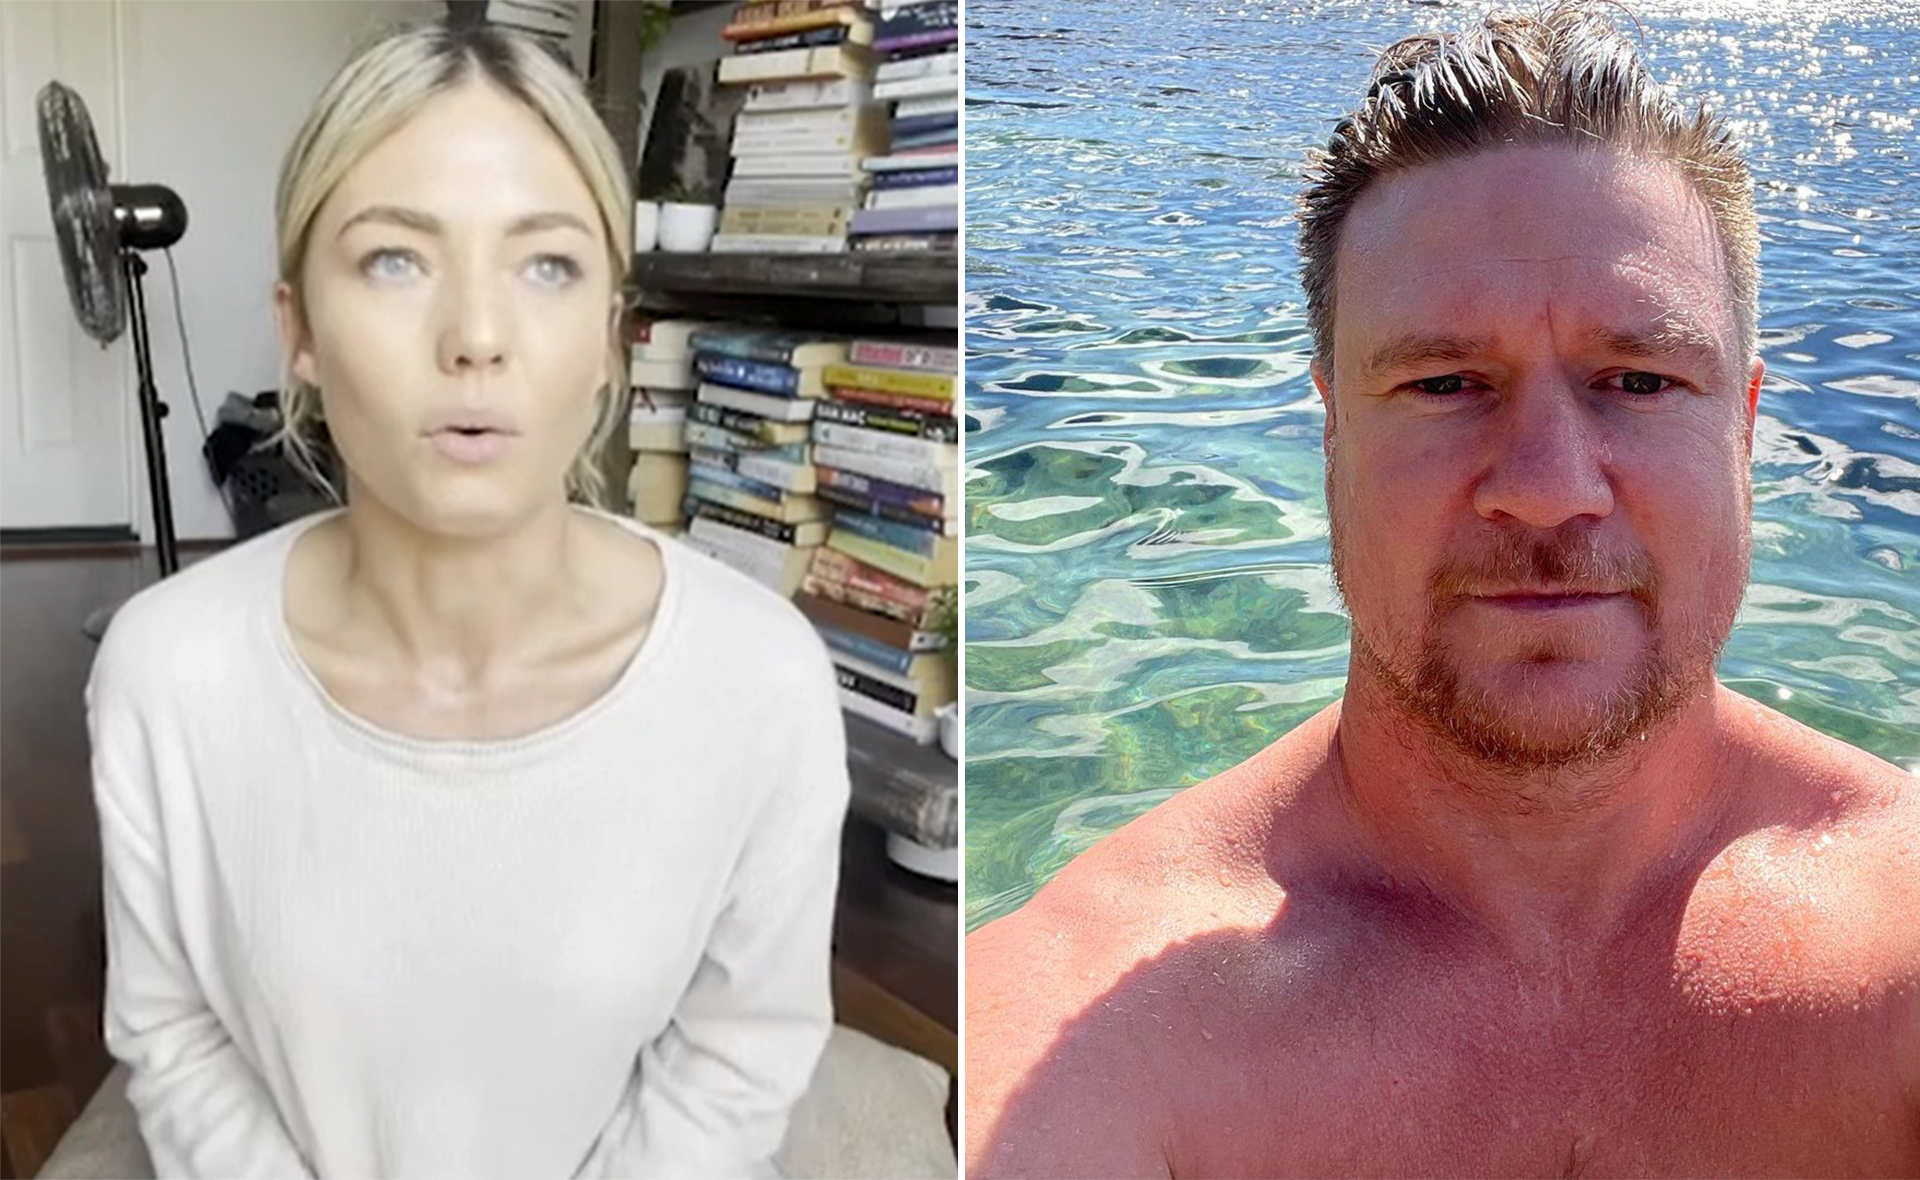 MAFS star Dean Wells appears to defend Sam Frost over COVID vaccine saga: ‘We should respect everyone’s position’